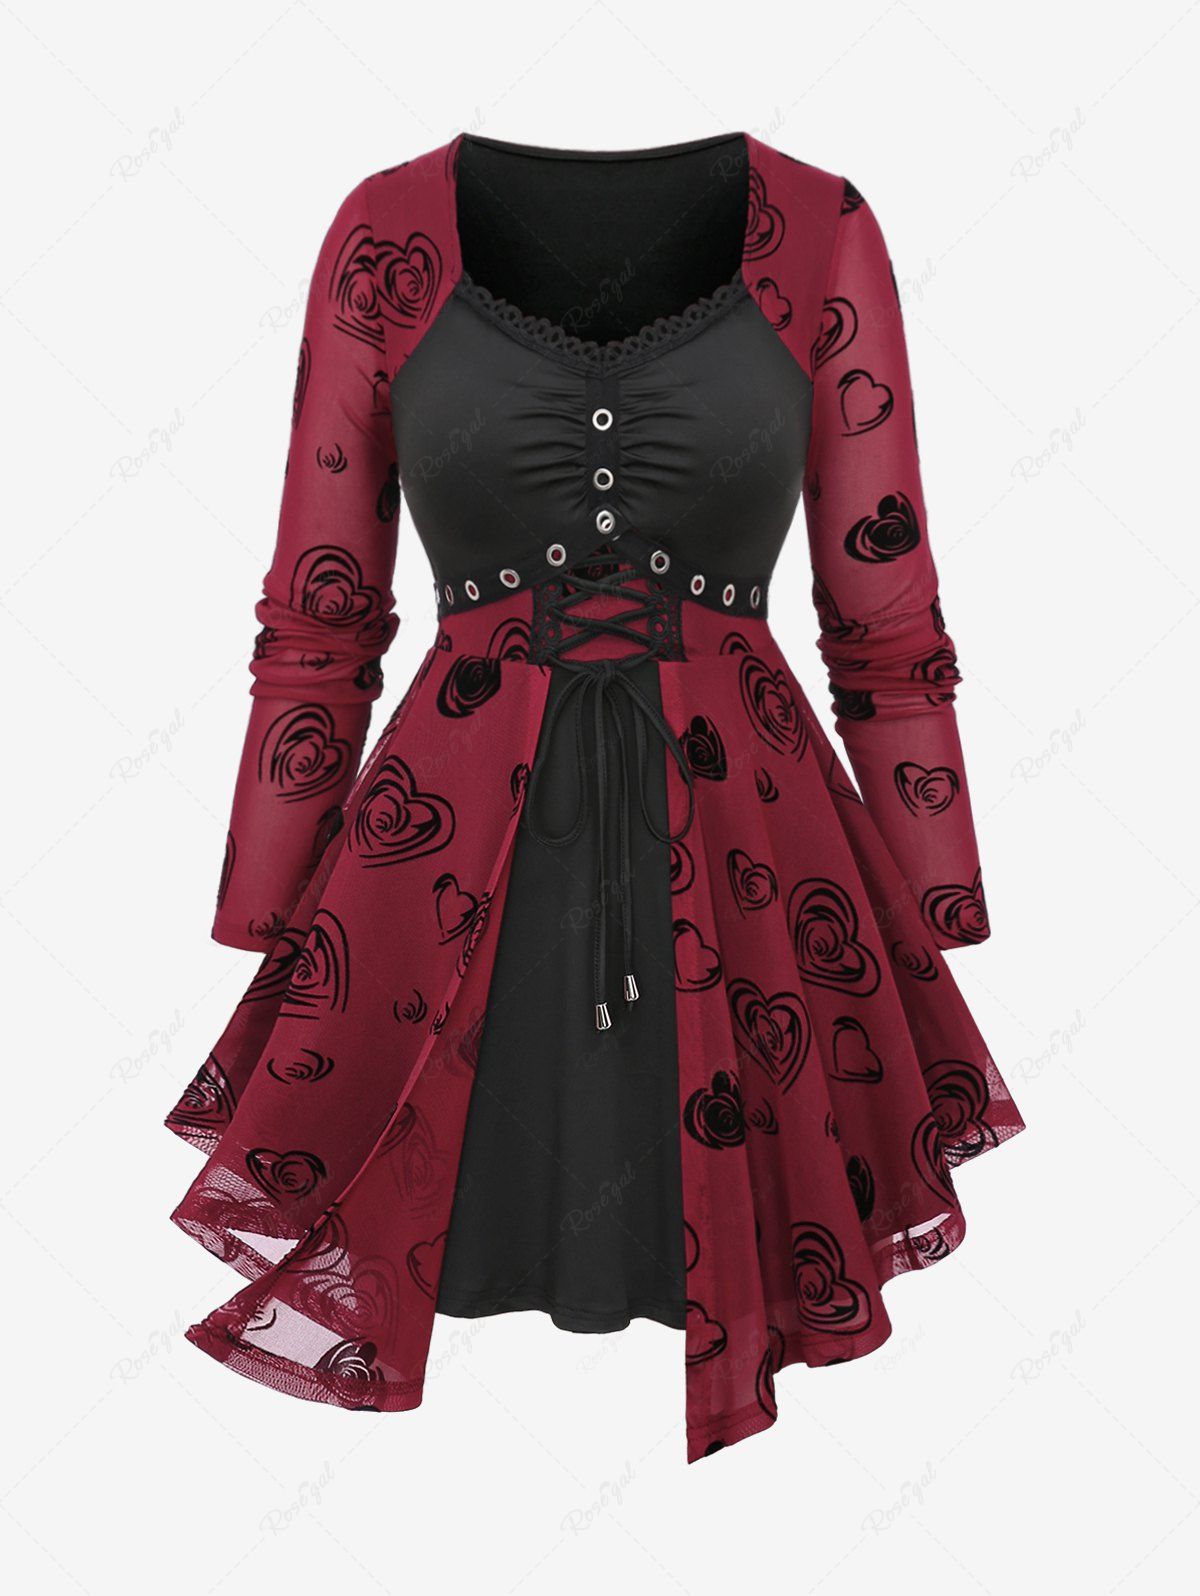 Fashion Plus Size Lace Up Grommets Rose Flower Heart Flocking Mesh Ruched Asymmetrical Long Sleeve  2 In 1 Top  